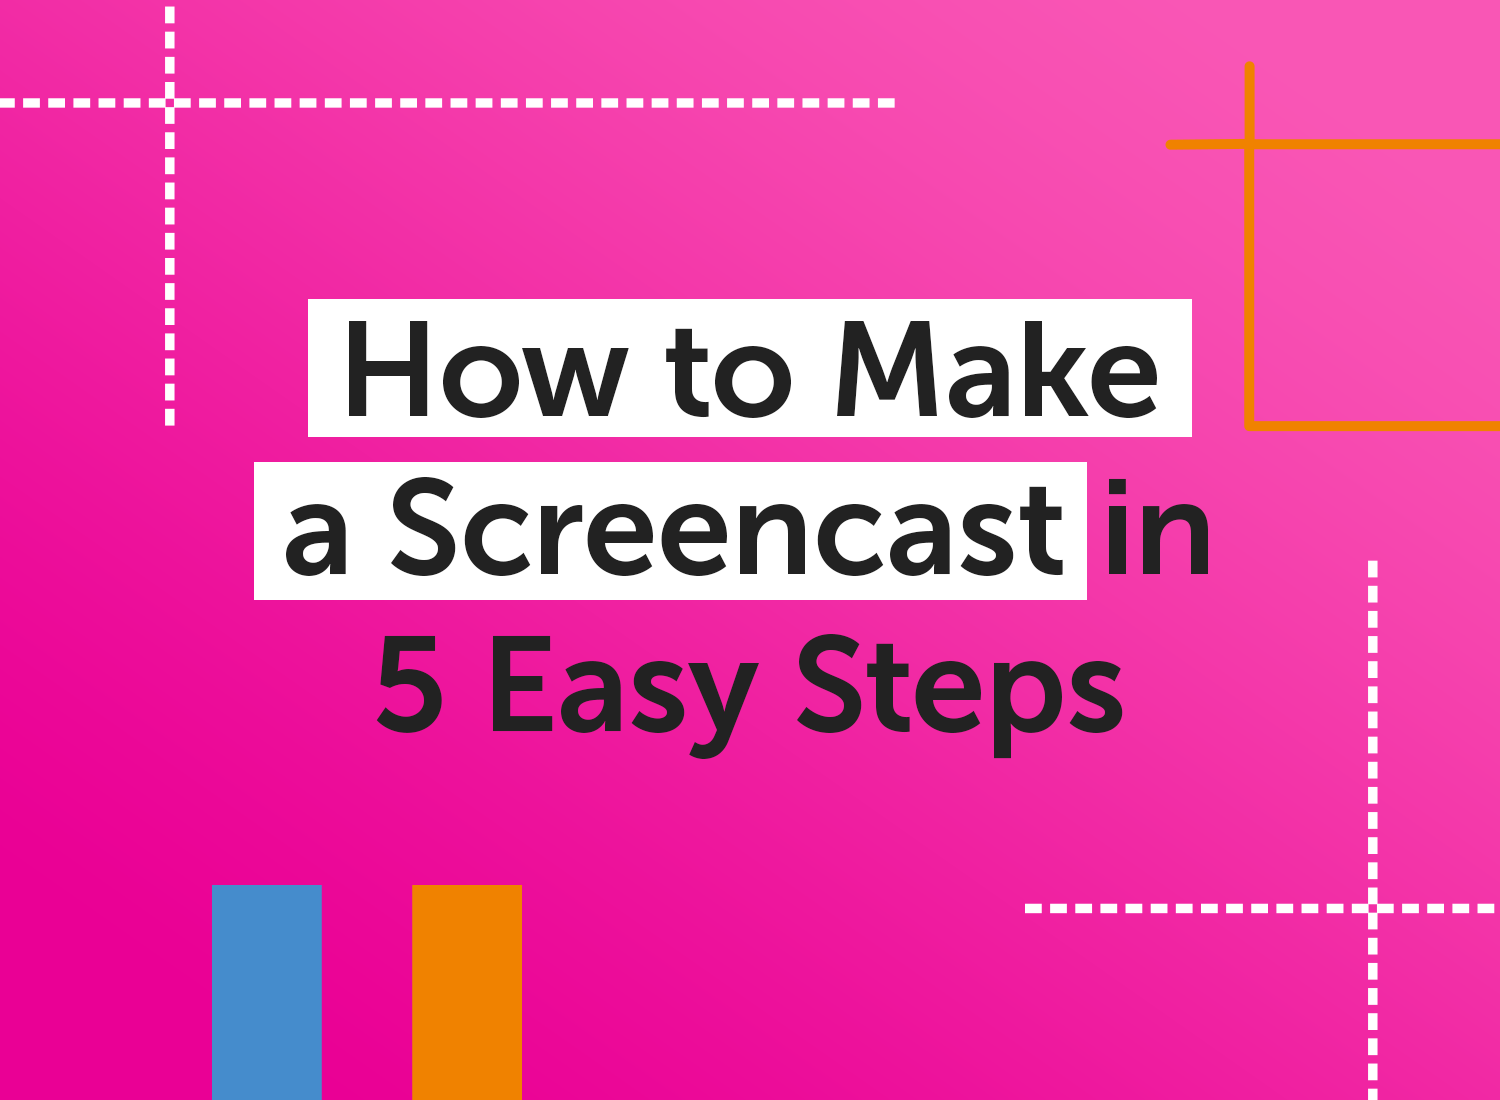 how to make a screencast in 5 easy steps